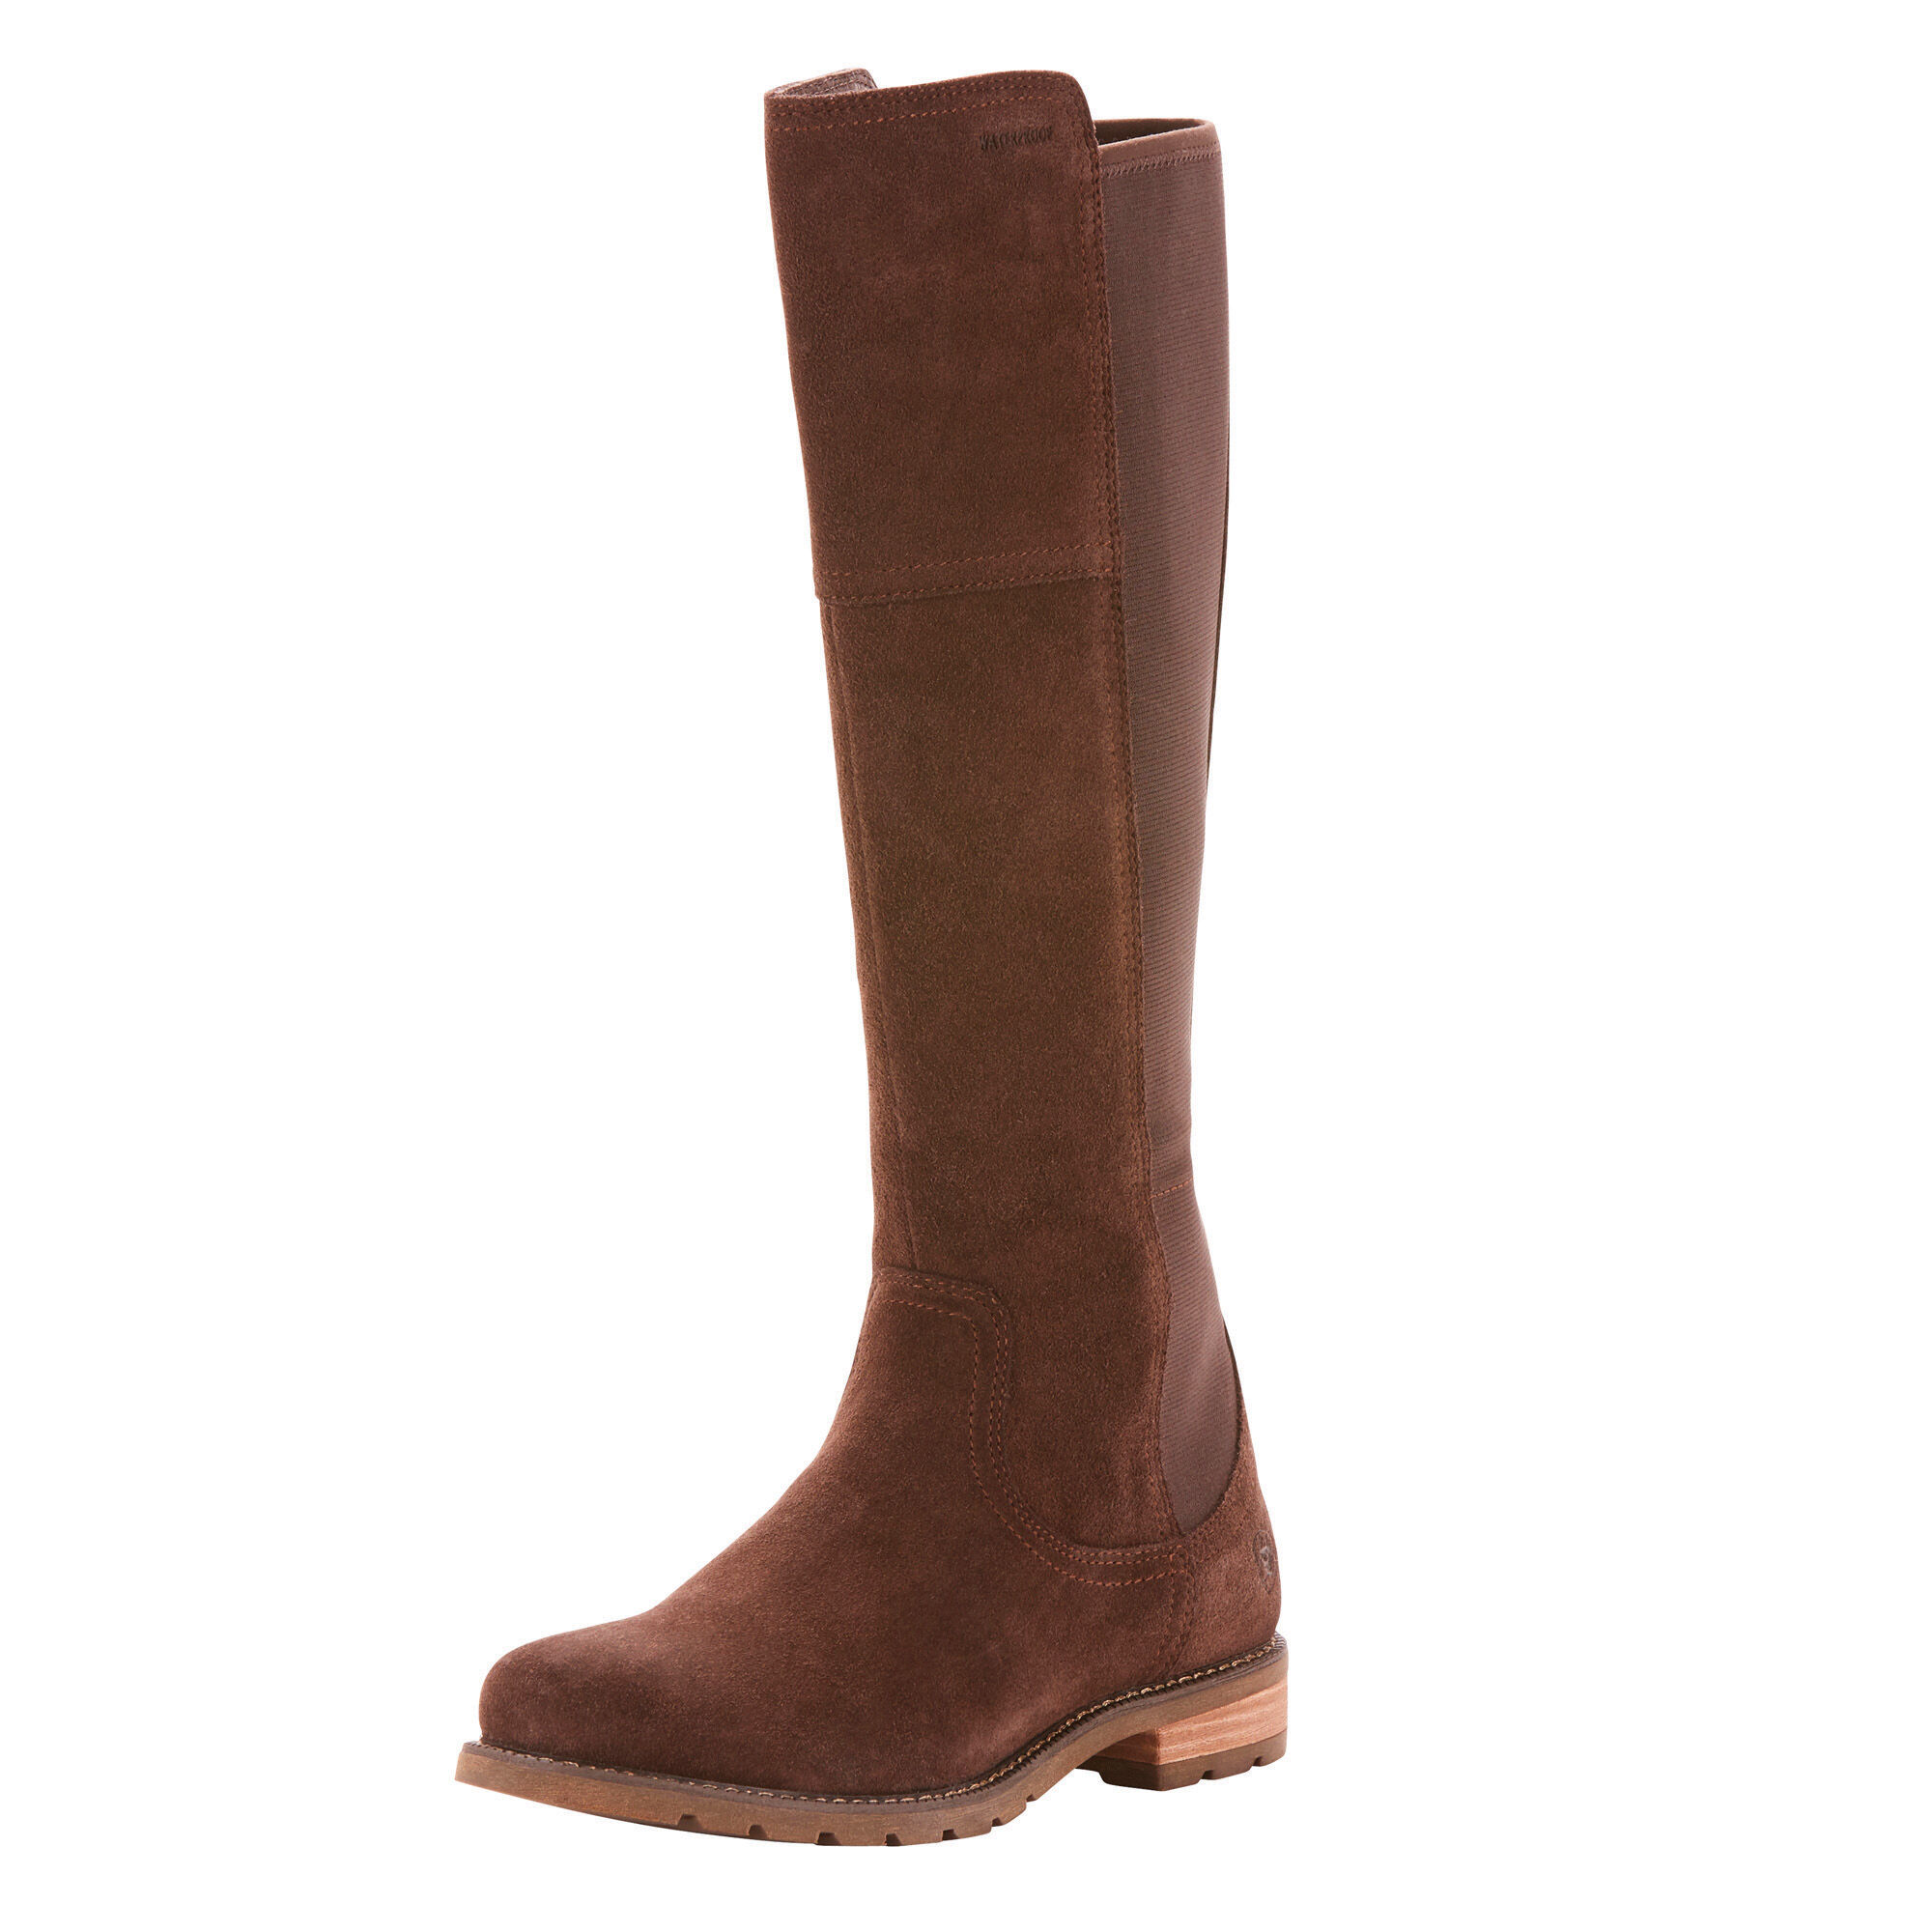 Women's Sutton Waterproof Boots in Chocolate Leather  by Ariat